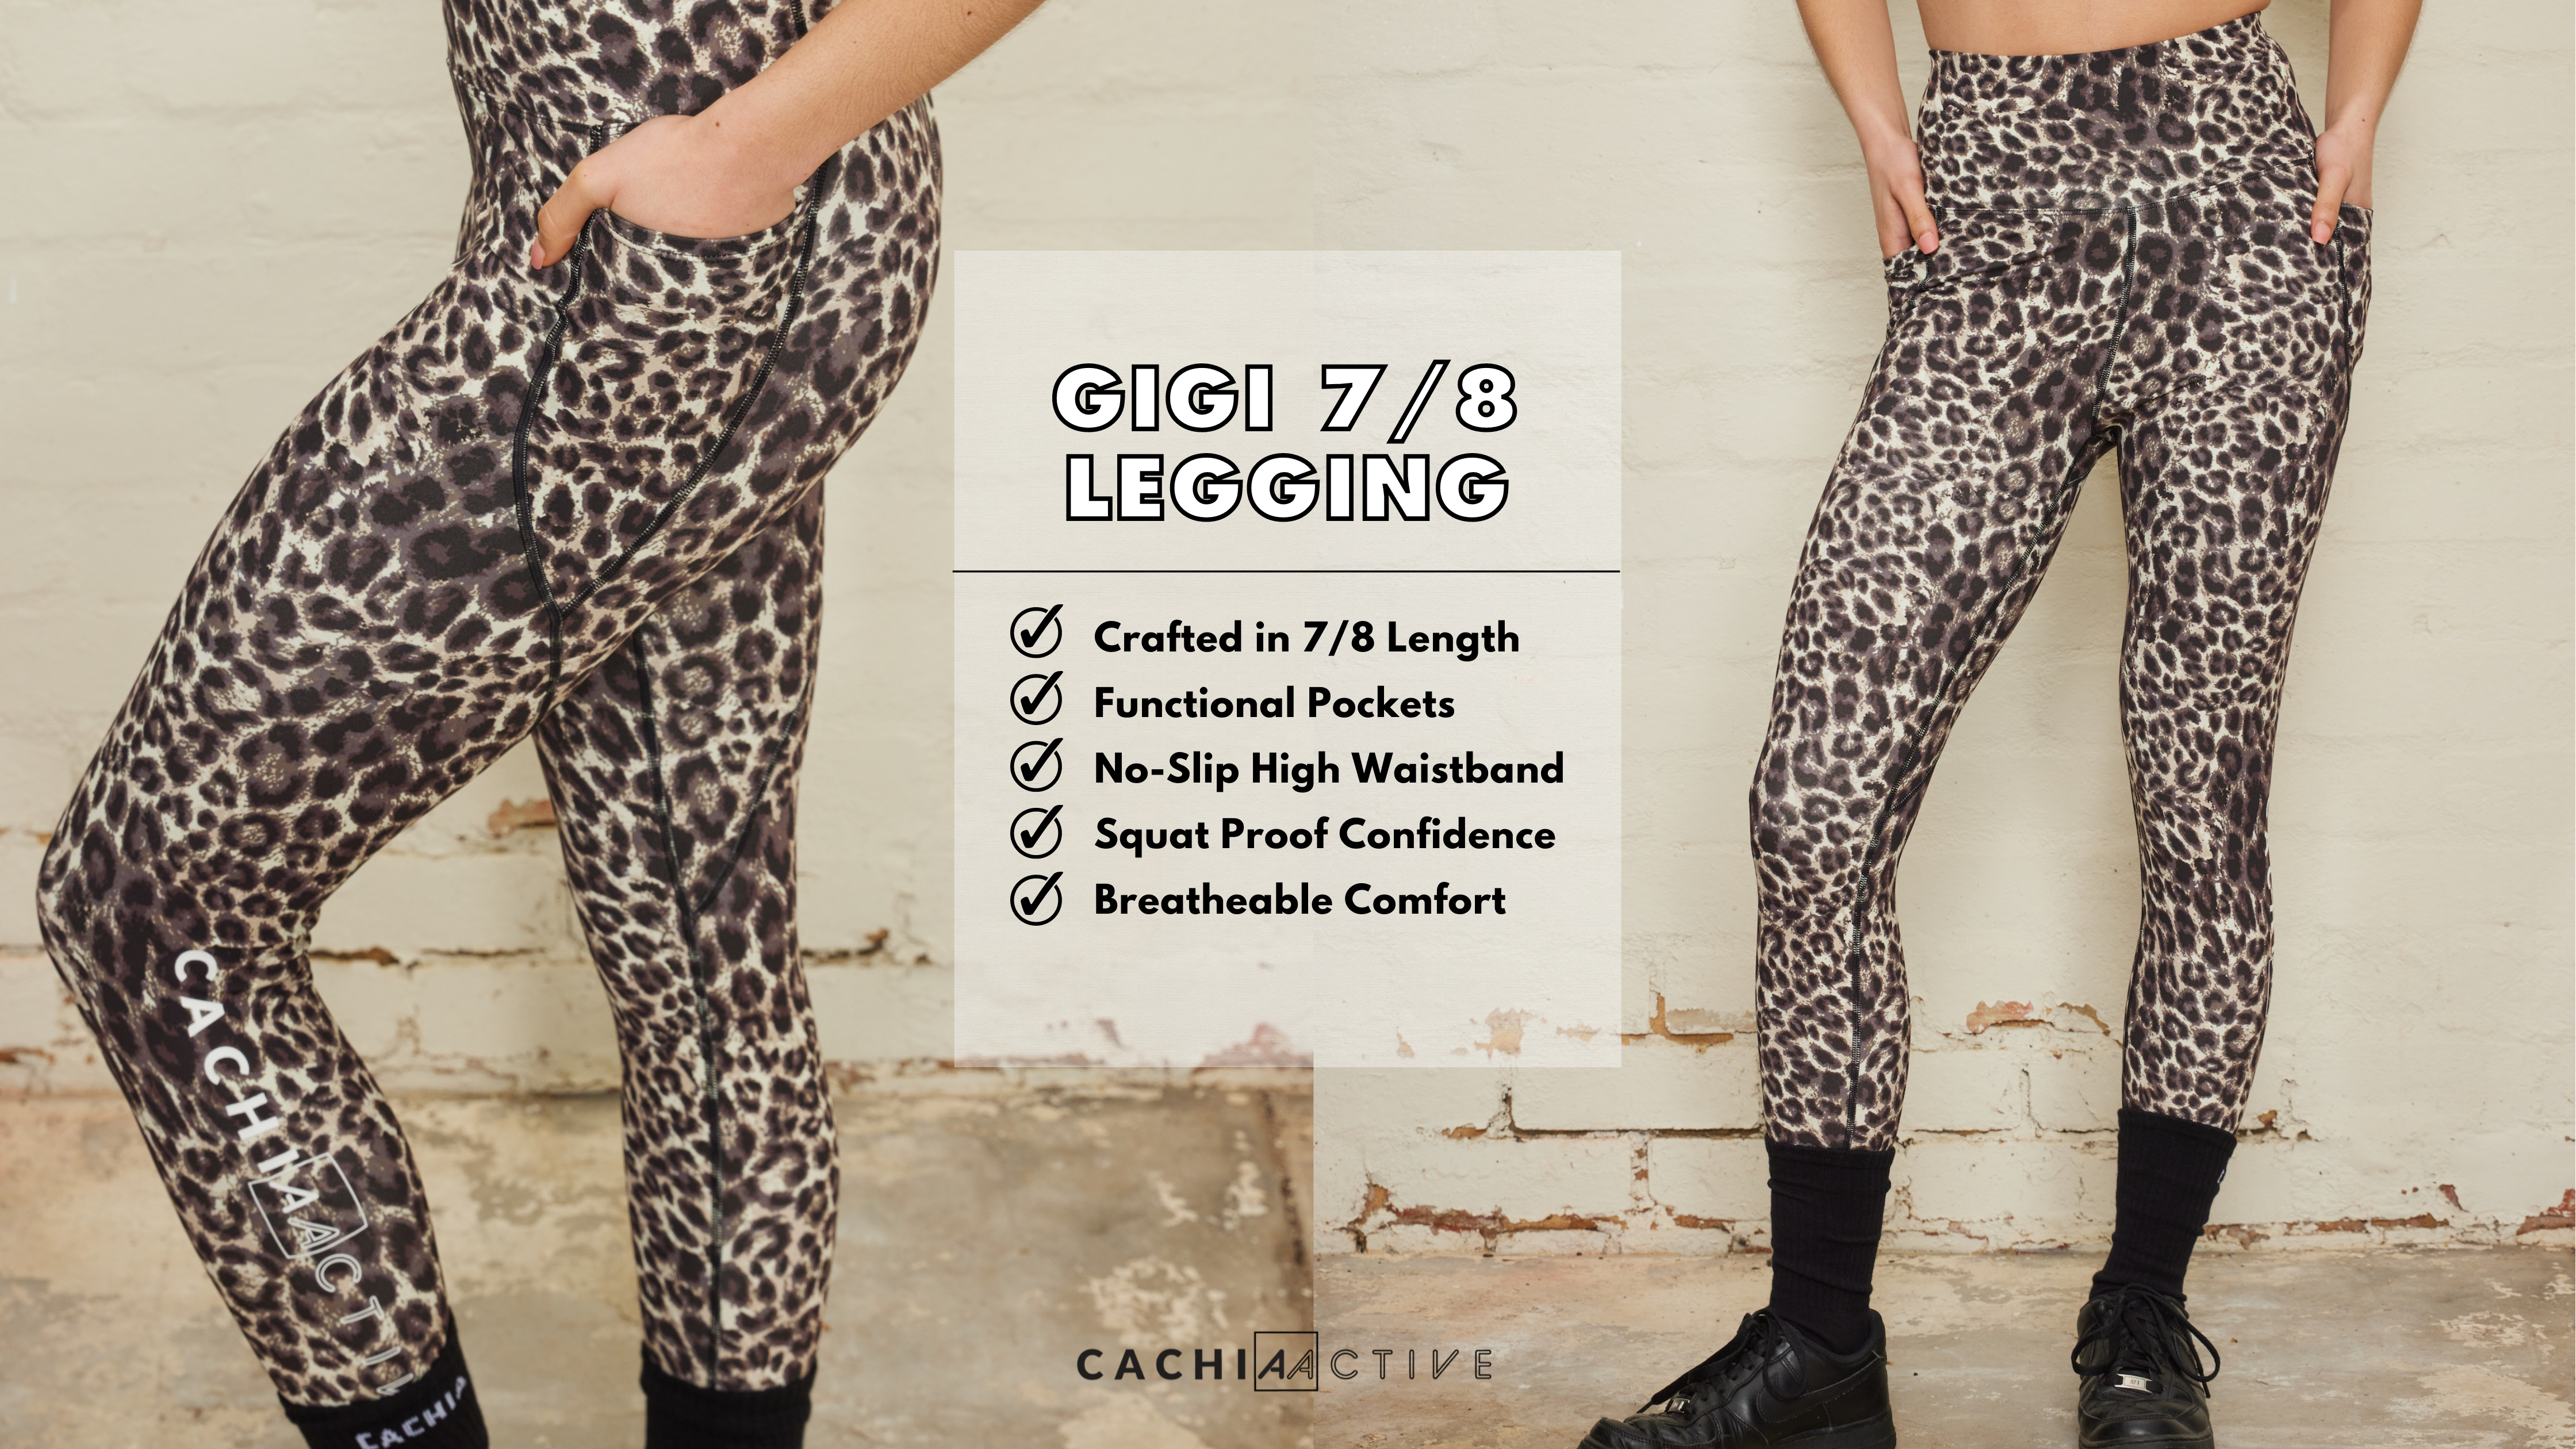 Unleash your fierce side with these leopard printed leggings